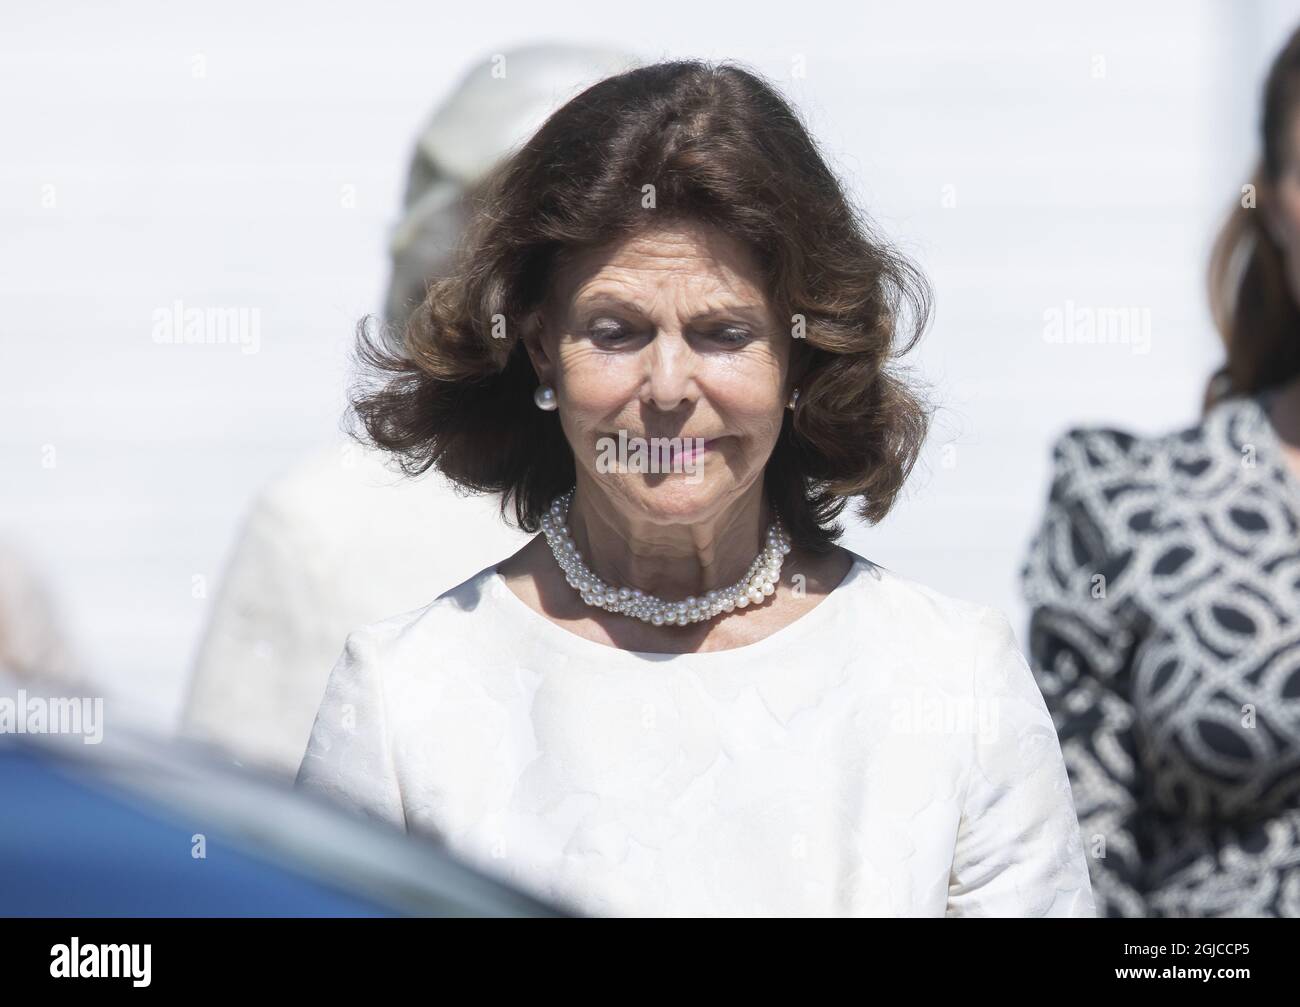 Queen Silvia Funeral of Anki Wallenberg in Dalaro church, Stockholm, Sweden 19 July 2019 Anki Wallenberg died in a sailing accident on the lake Geneva. She resided in London and was a close friend to the Swedish Royal Family. (c) Patrik Ã–sterberg / TT / kod 2857  Stock Photo